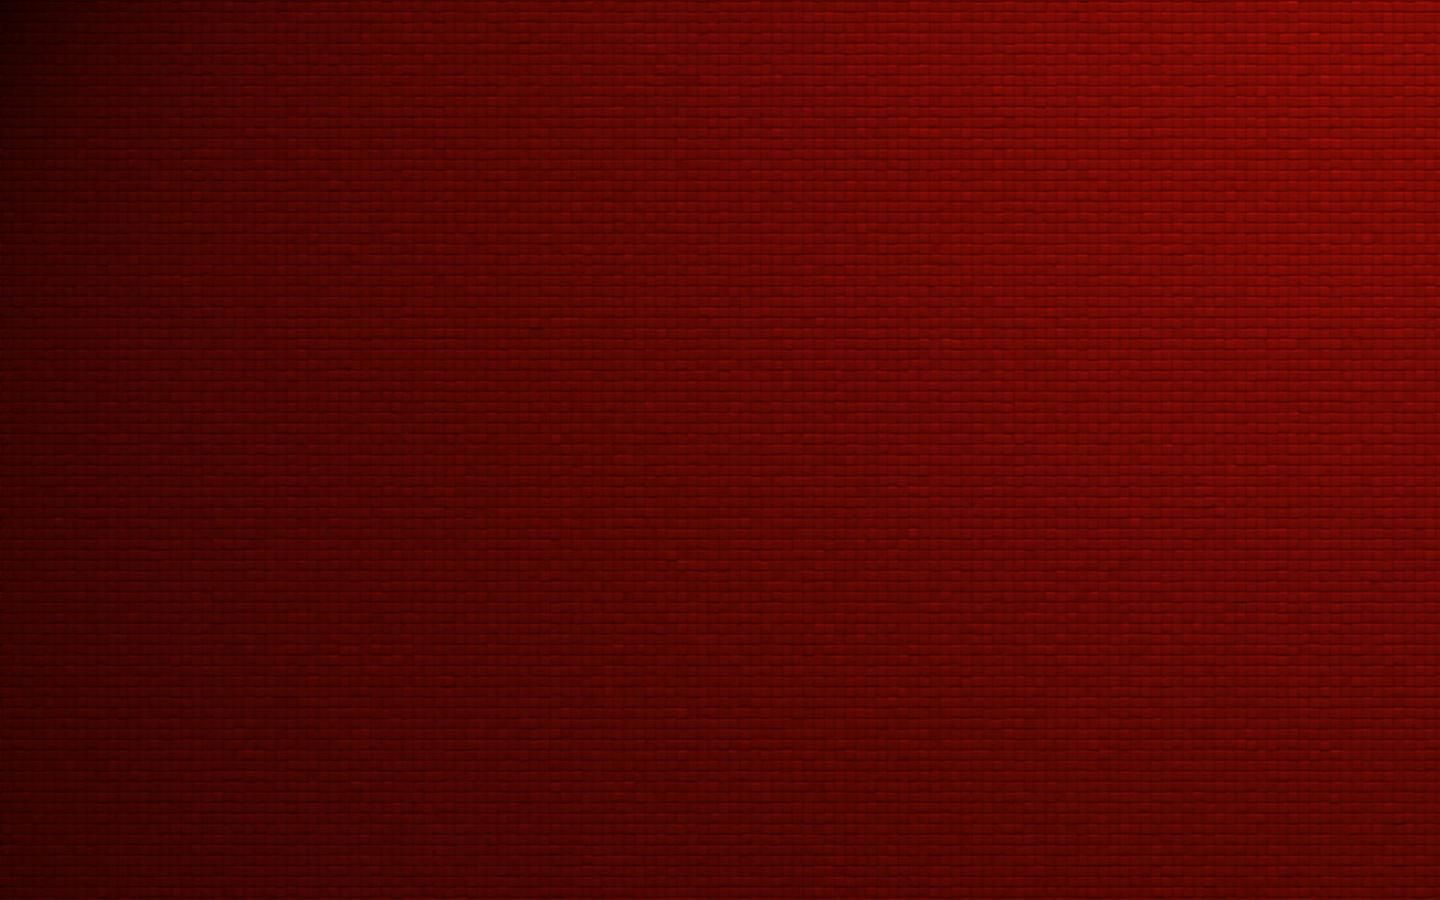 A red brick wall background - 1440x900